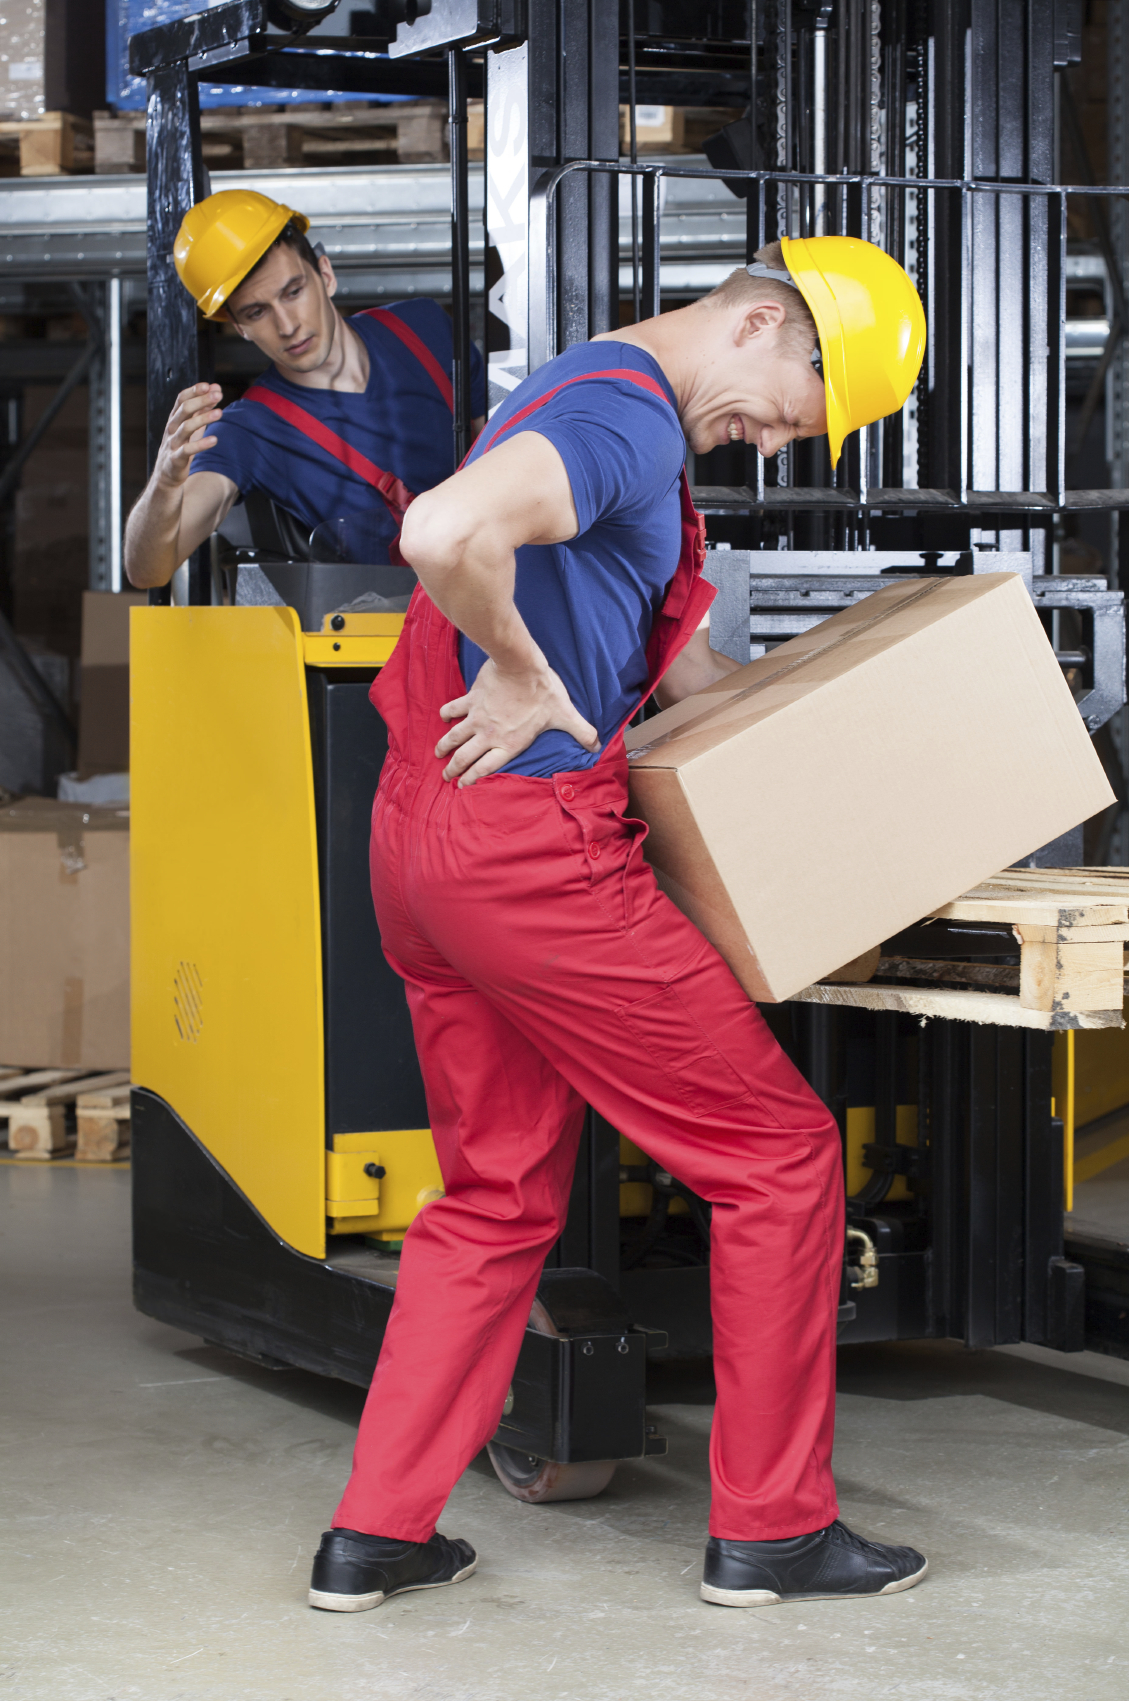 How can you reduce workplace injury costs?